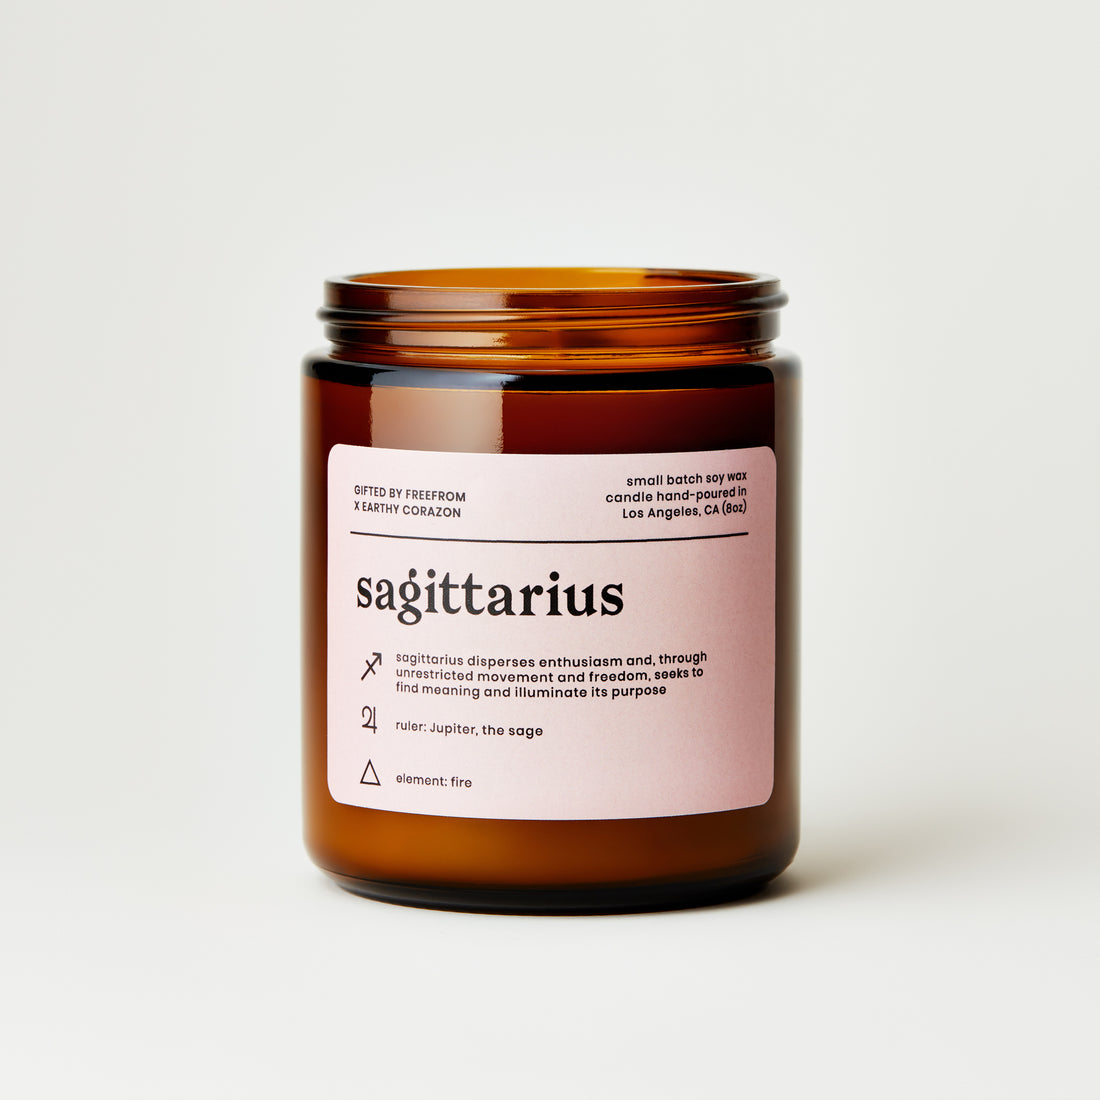 Sagittarius Box by GIFTED